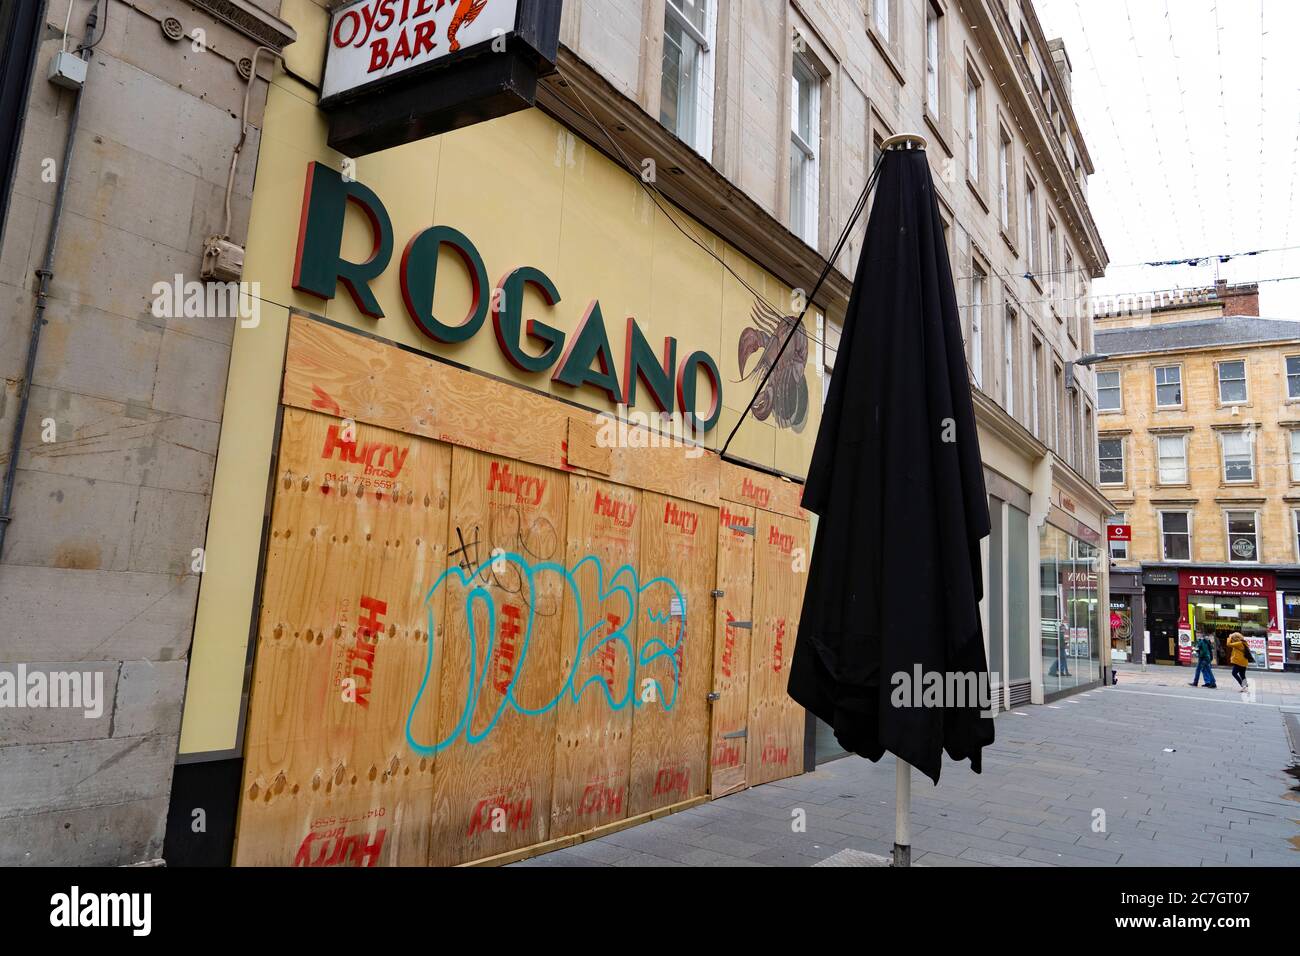 Glasgow, Scotland, UK. 17 July, 2020.  Images from Glasgow city centre as covid-19 restrictions are relaxed and  the public are out and about shopping and at work. Pictured; Rogano Oyster Bar restaurant remains closed and boarded up.. Iain Masterton/Alamy Live News Stock Photo